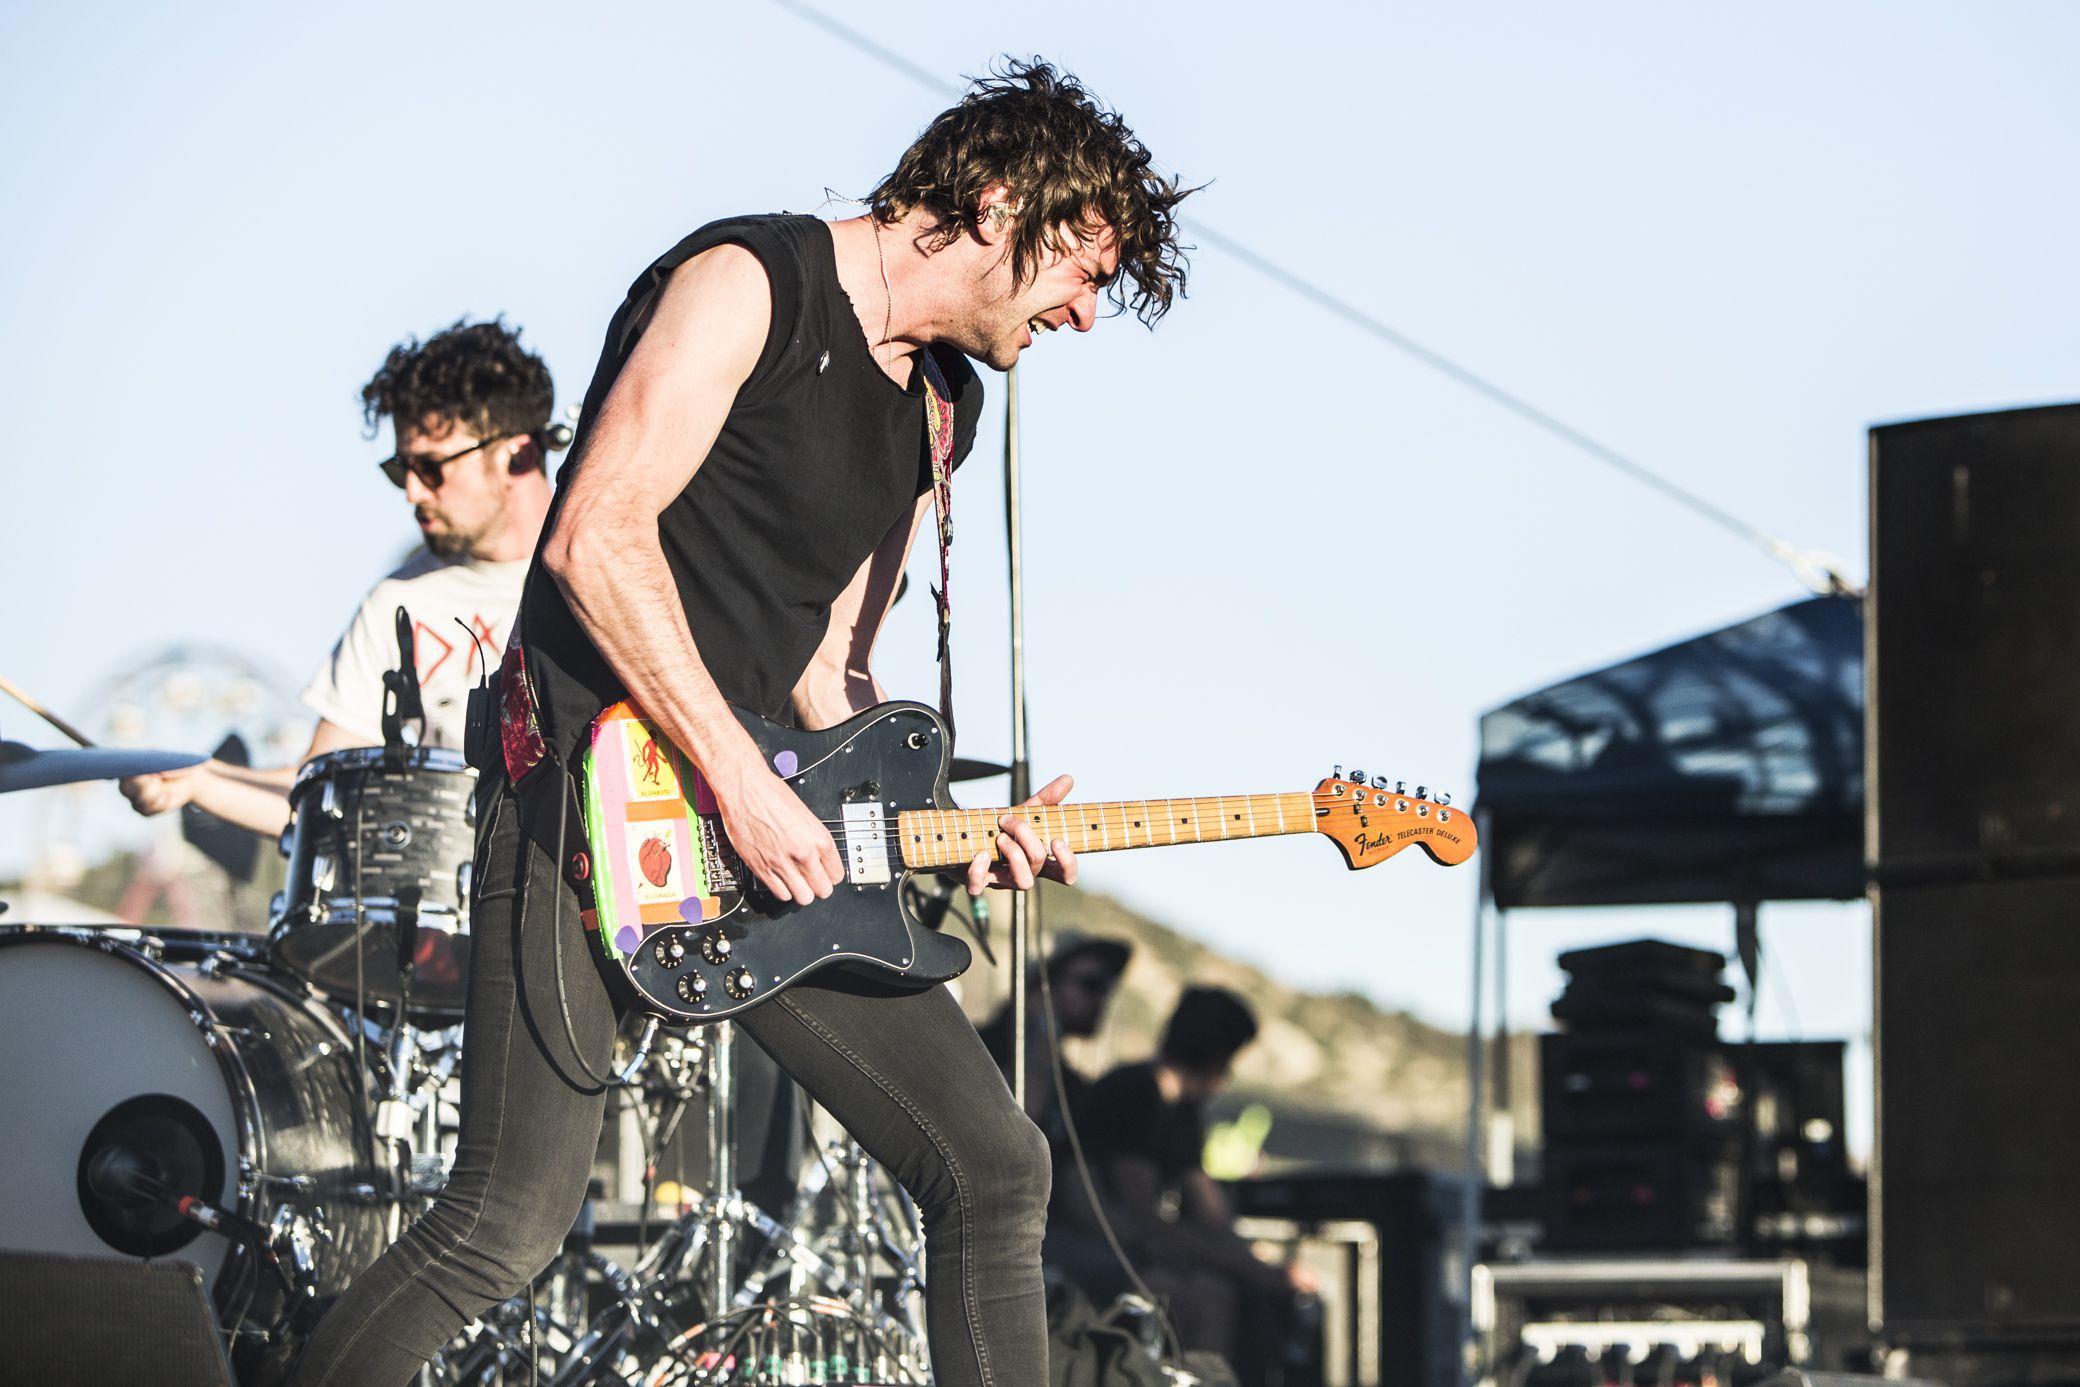 japandroids 5 Cal Jam Offered Everything Youd Want From Dave Grohl